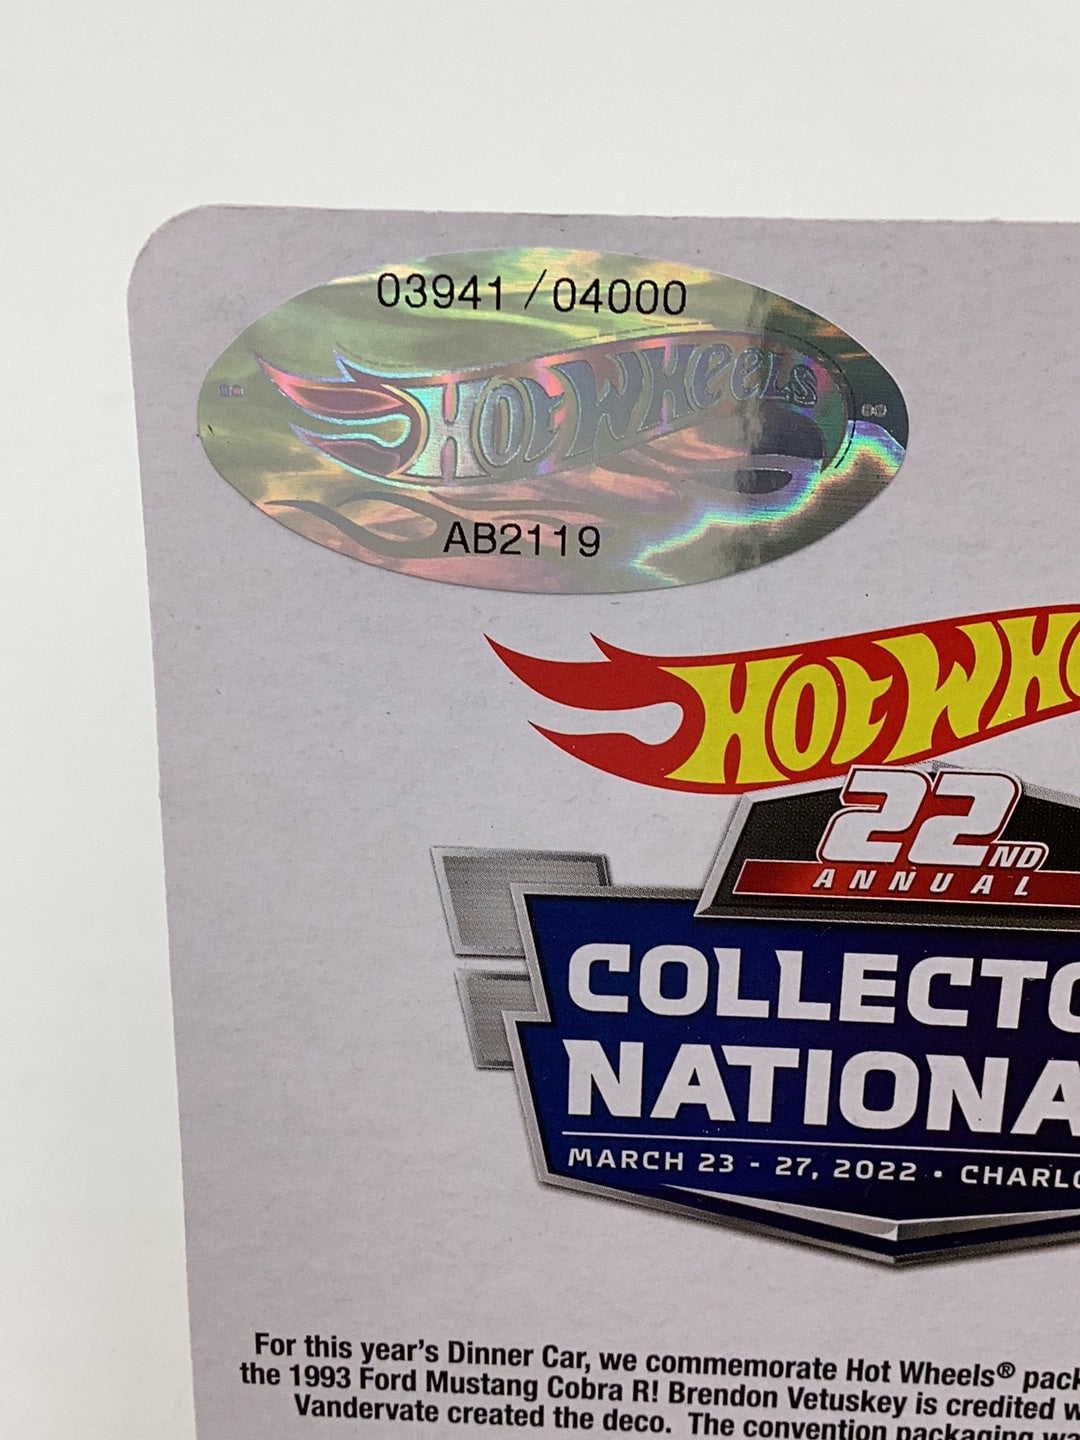 Hot wheels 22nd annual collectors Nationals dinner car 1993 Ford Mustang cobra R 3941/4000 with protector